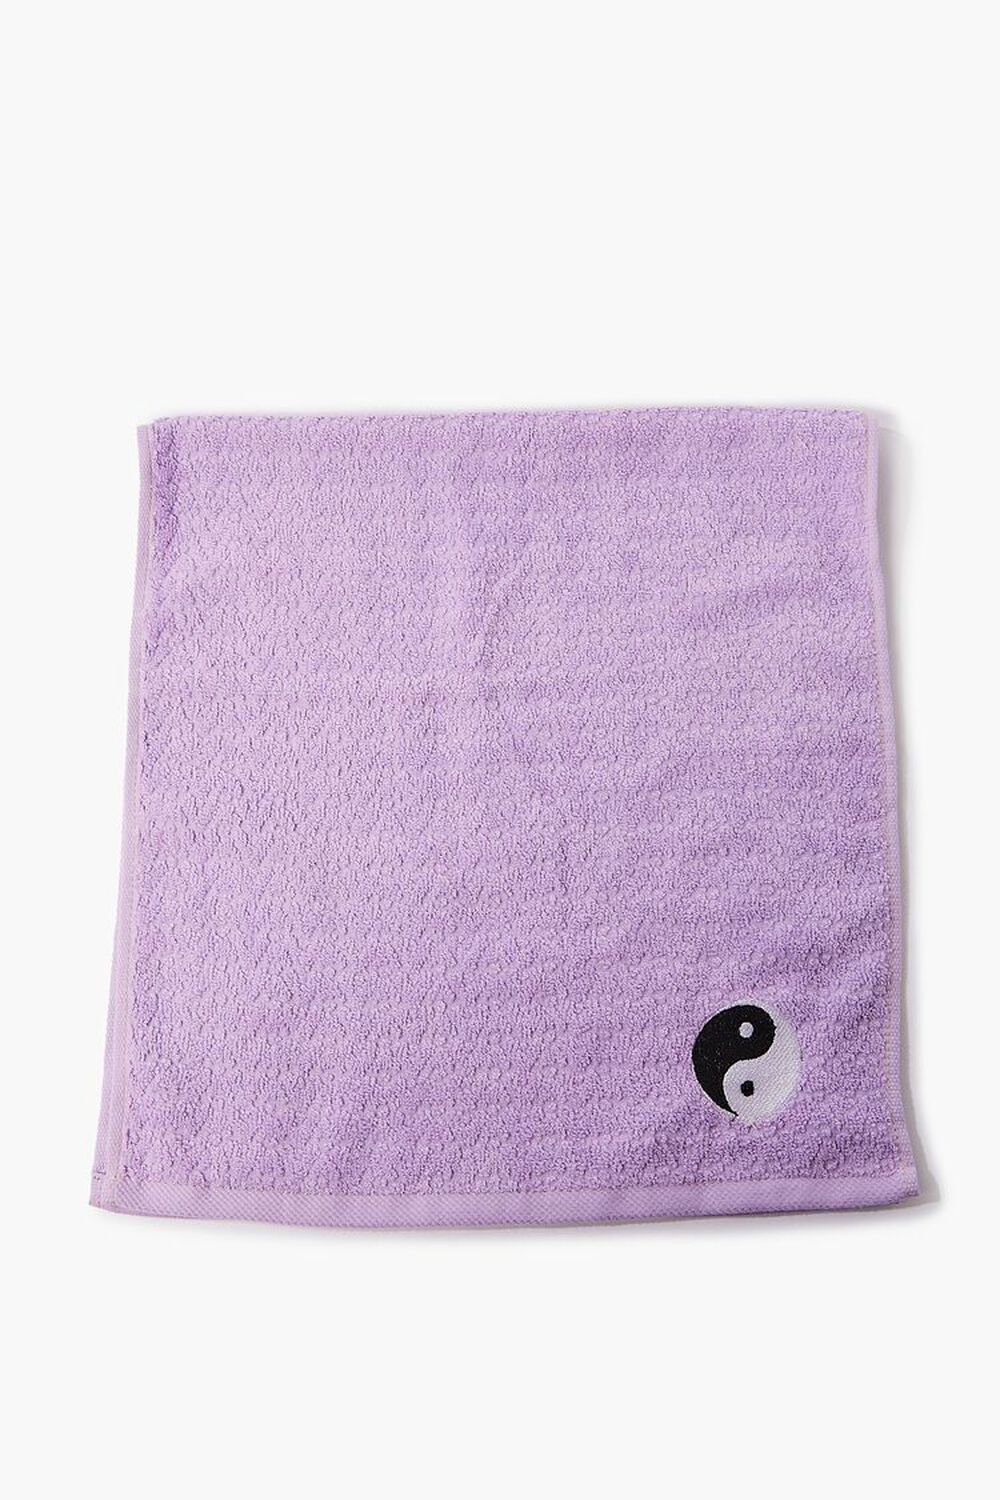 LAVENDER Embroidered Yin Yang Hand Towel, image 2